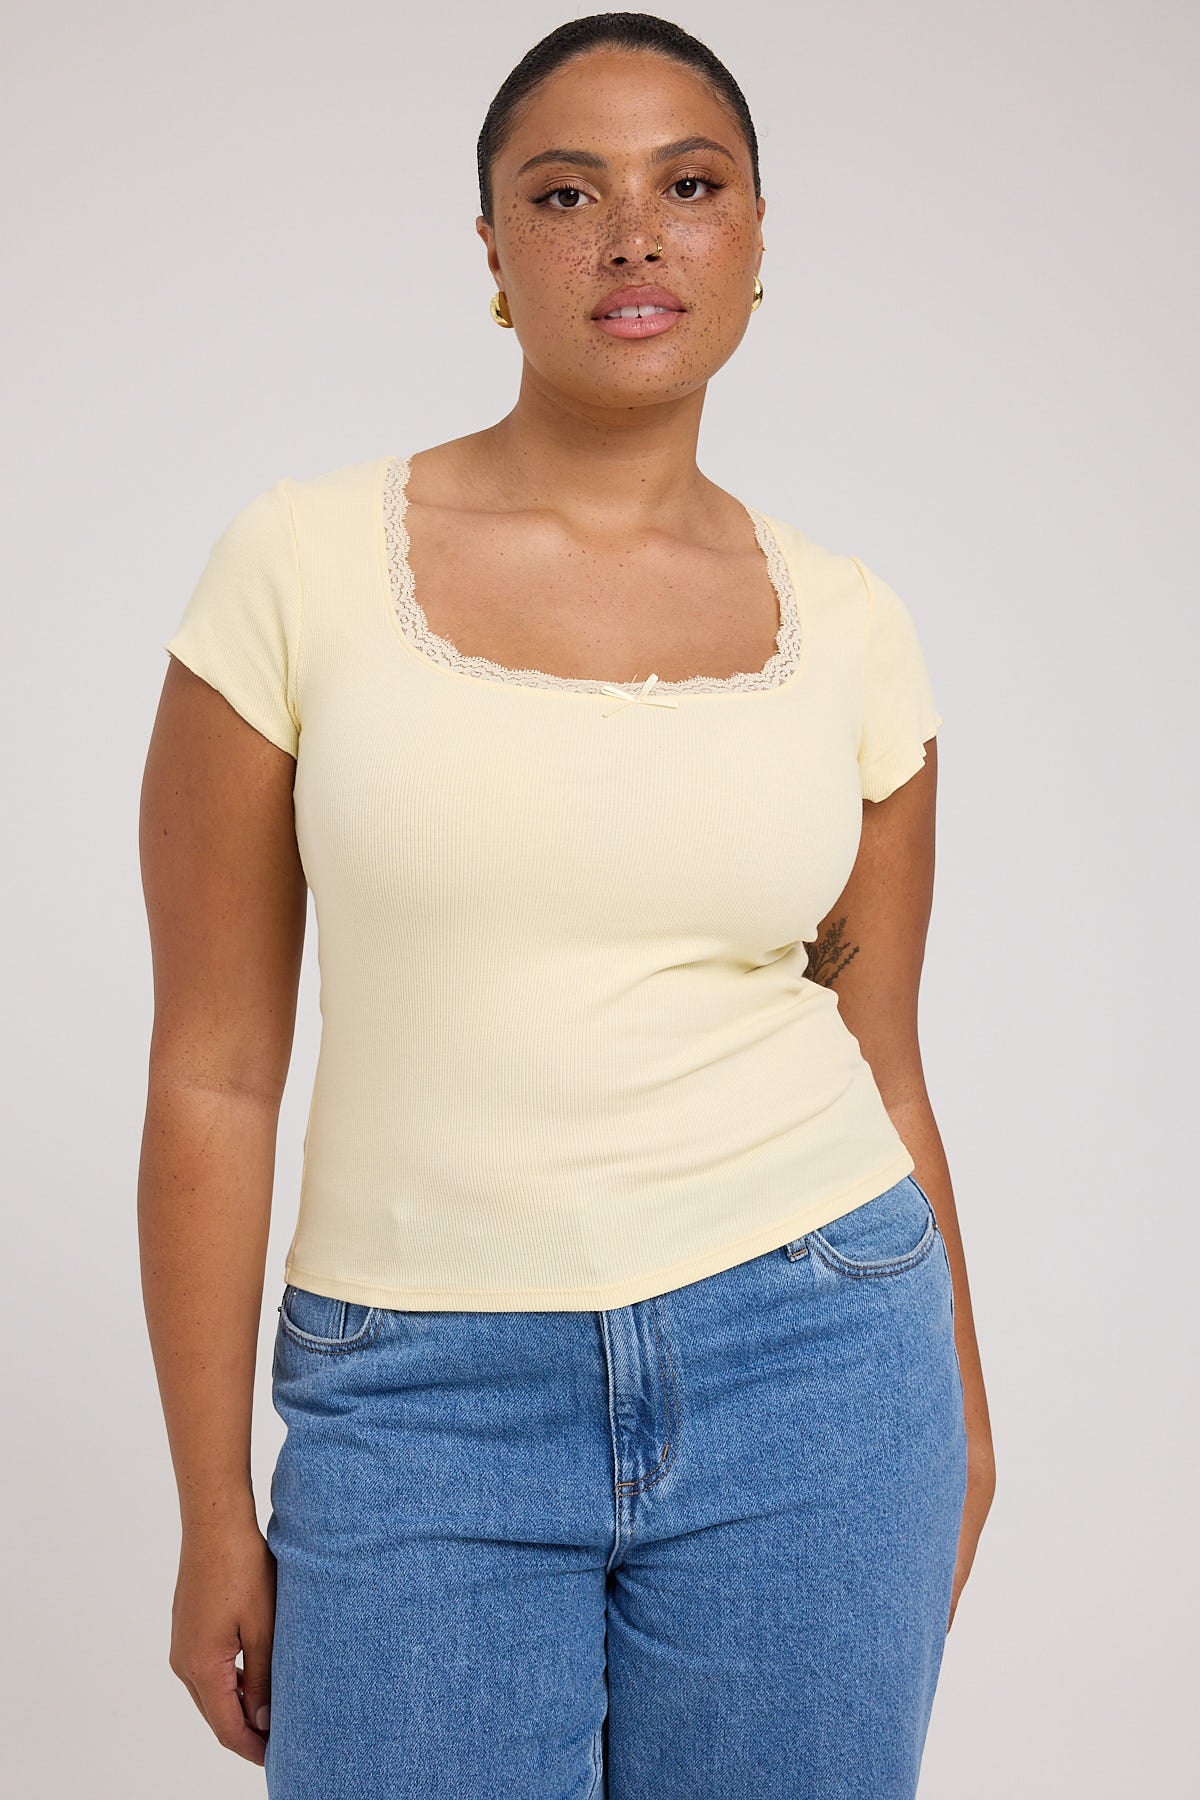 L&t Scoop Neck Lace Trim Tee Yellow